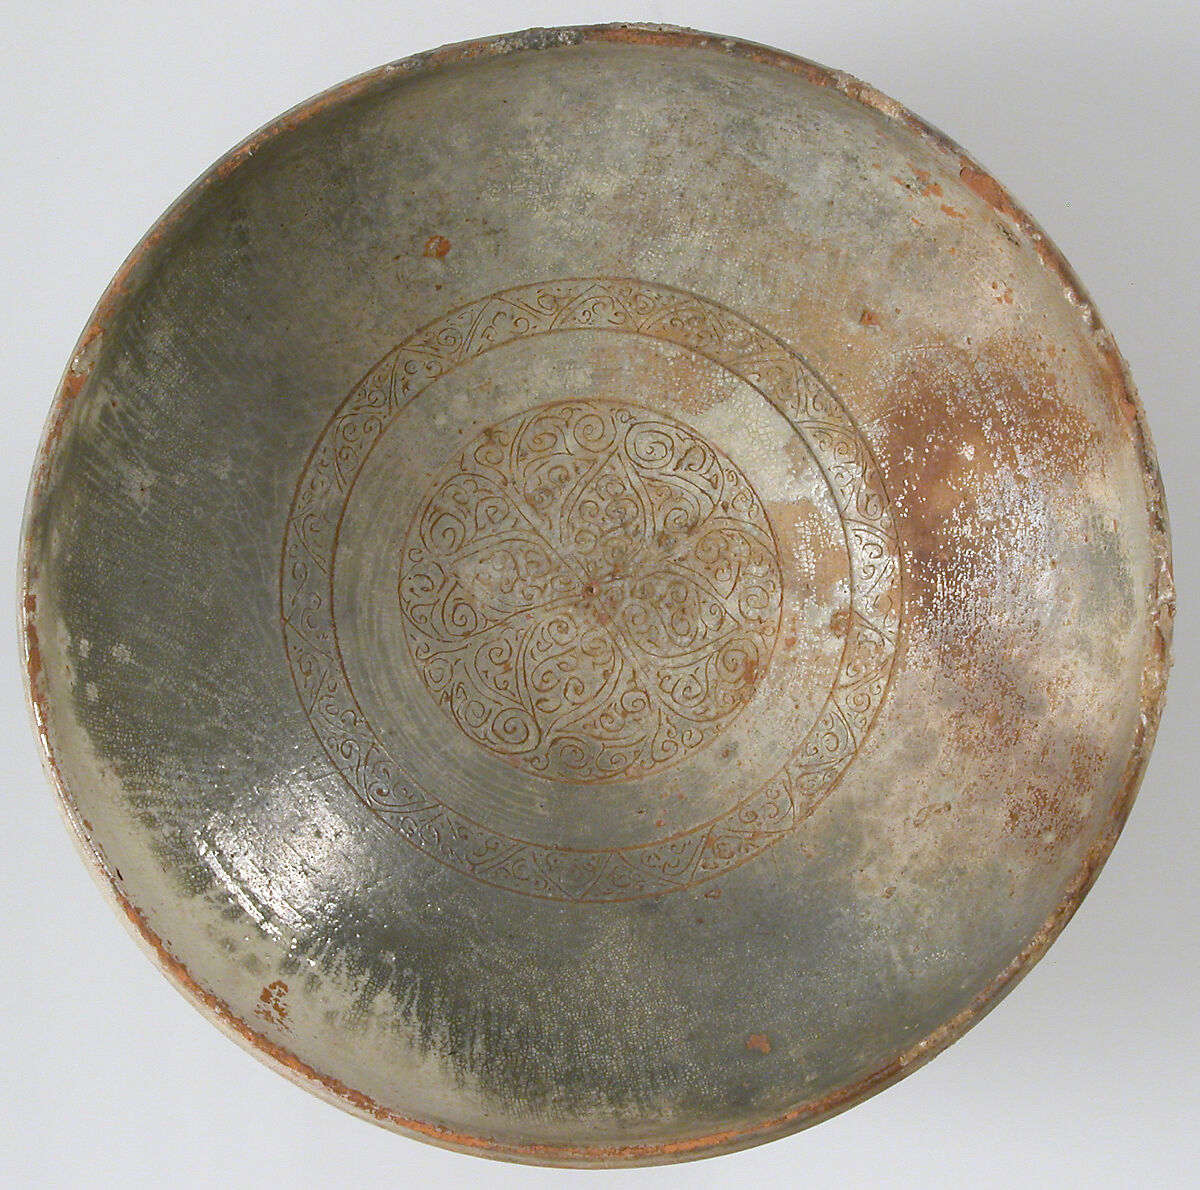 Bowl with Ornamented Rosette, Fired red earthenware, greenish/gray cream slip, clear glaze, Byzantine 